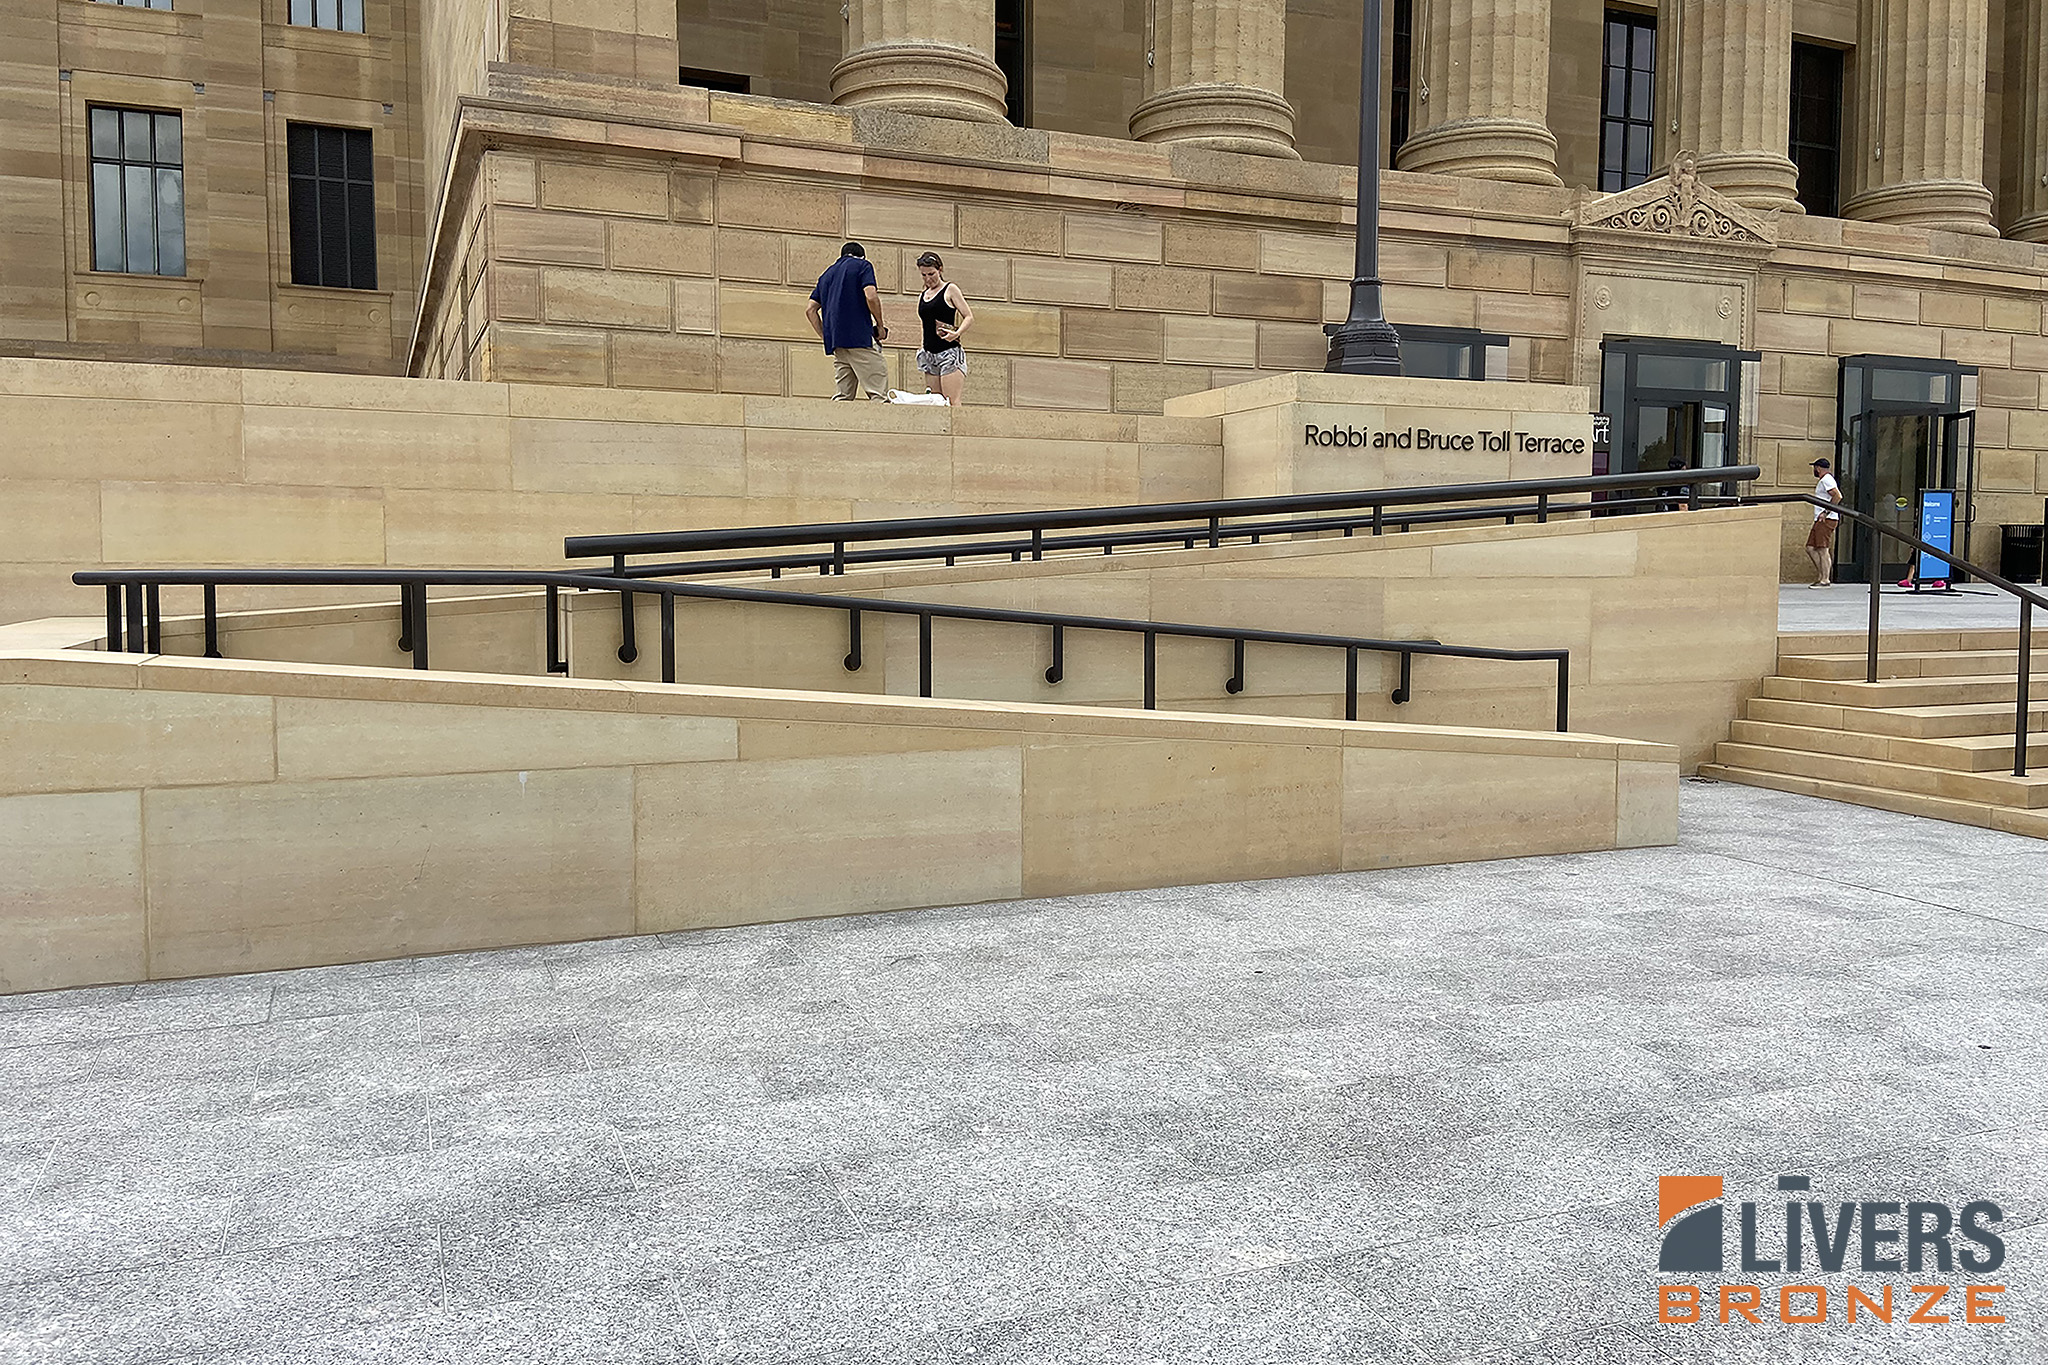 Livers Bronze Custom Bronze Railings were installed at the Lobby Stairs and Exterior Stairs at the Philadelphia Museum Of Art and were made in the USA.